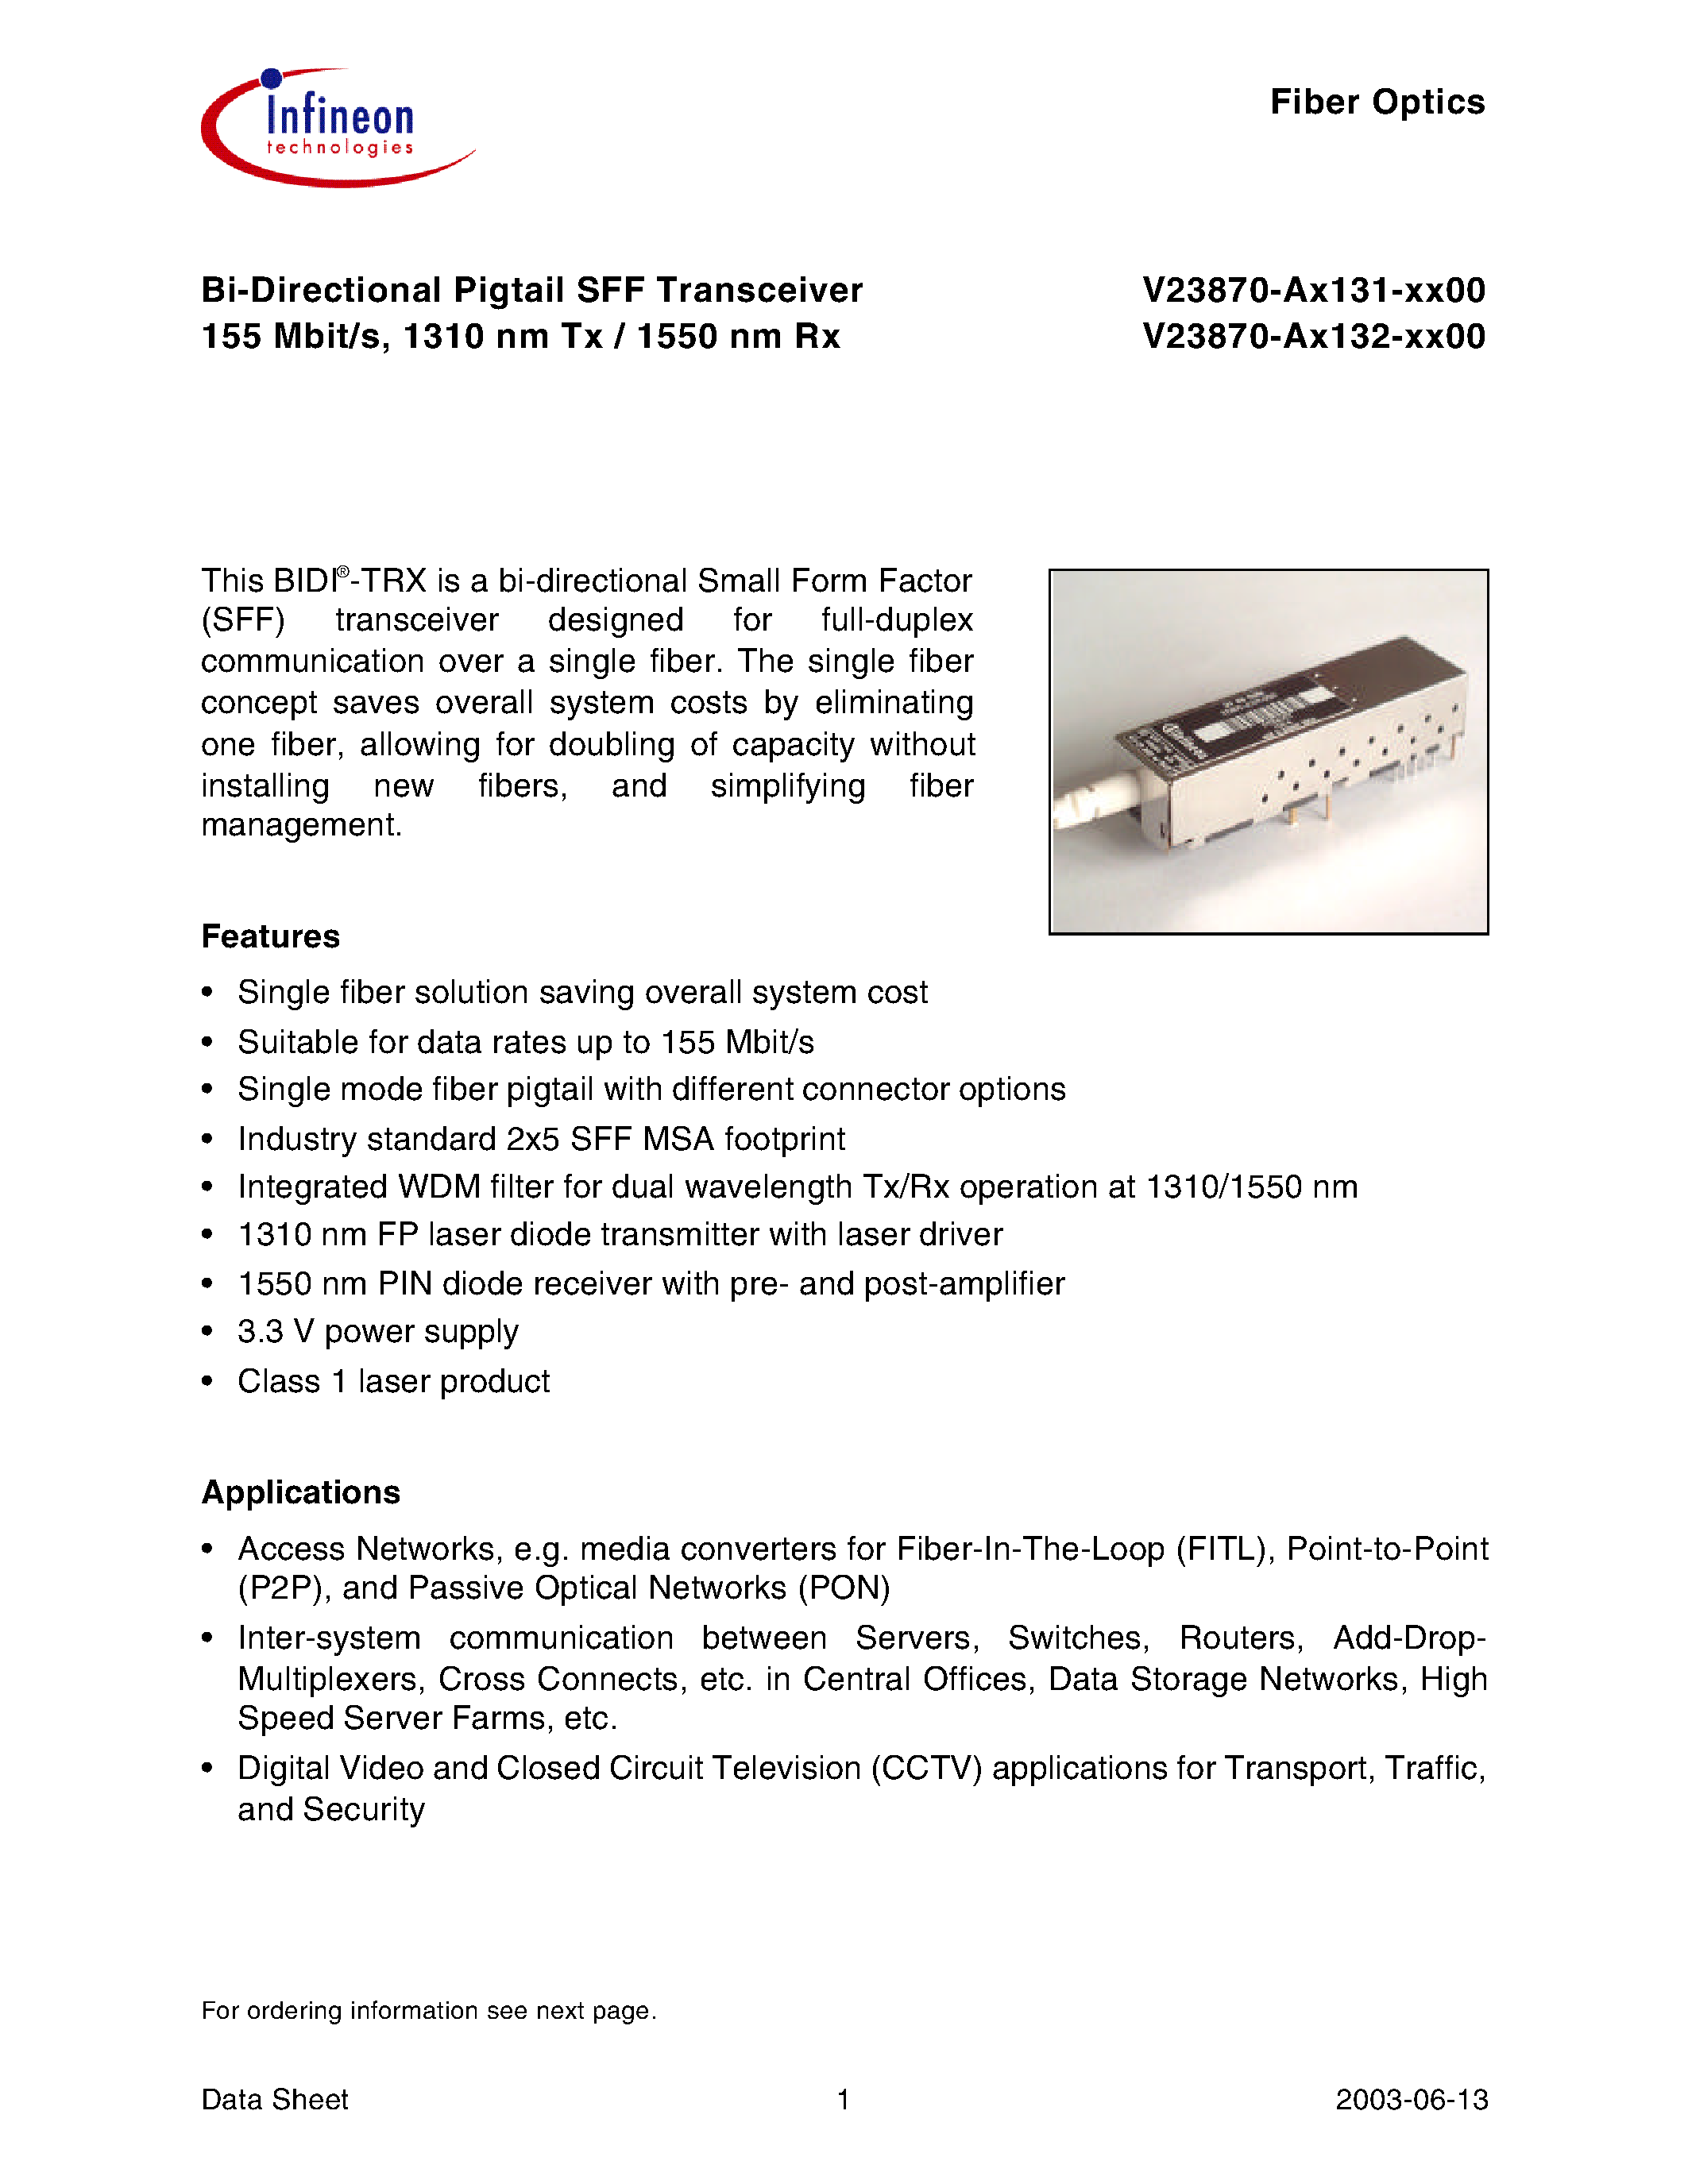 Datasheet V23870-A1132-F500 - Bi-Directional Pigtail SFF Transceiver 155 Mbit/s/ 1310 nm Tx / 1550 nm Rx page 1